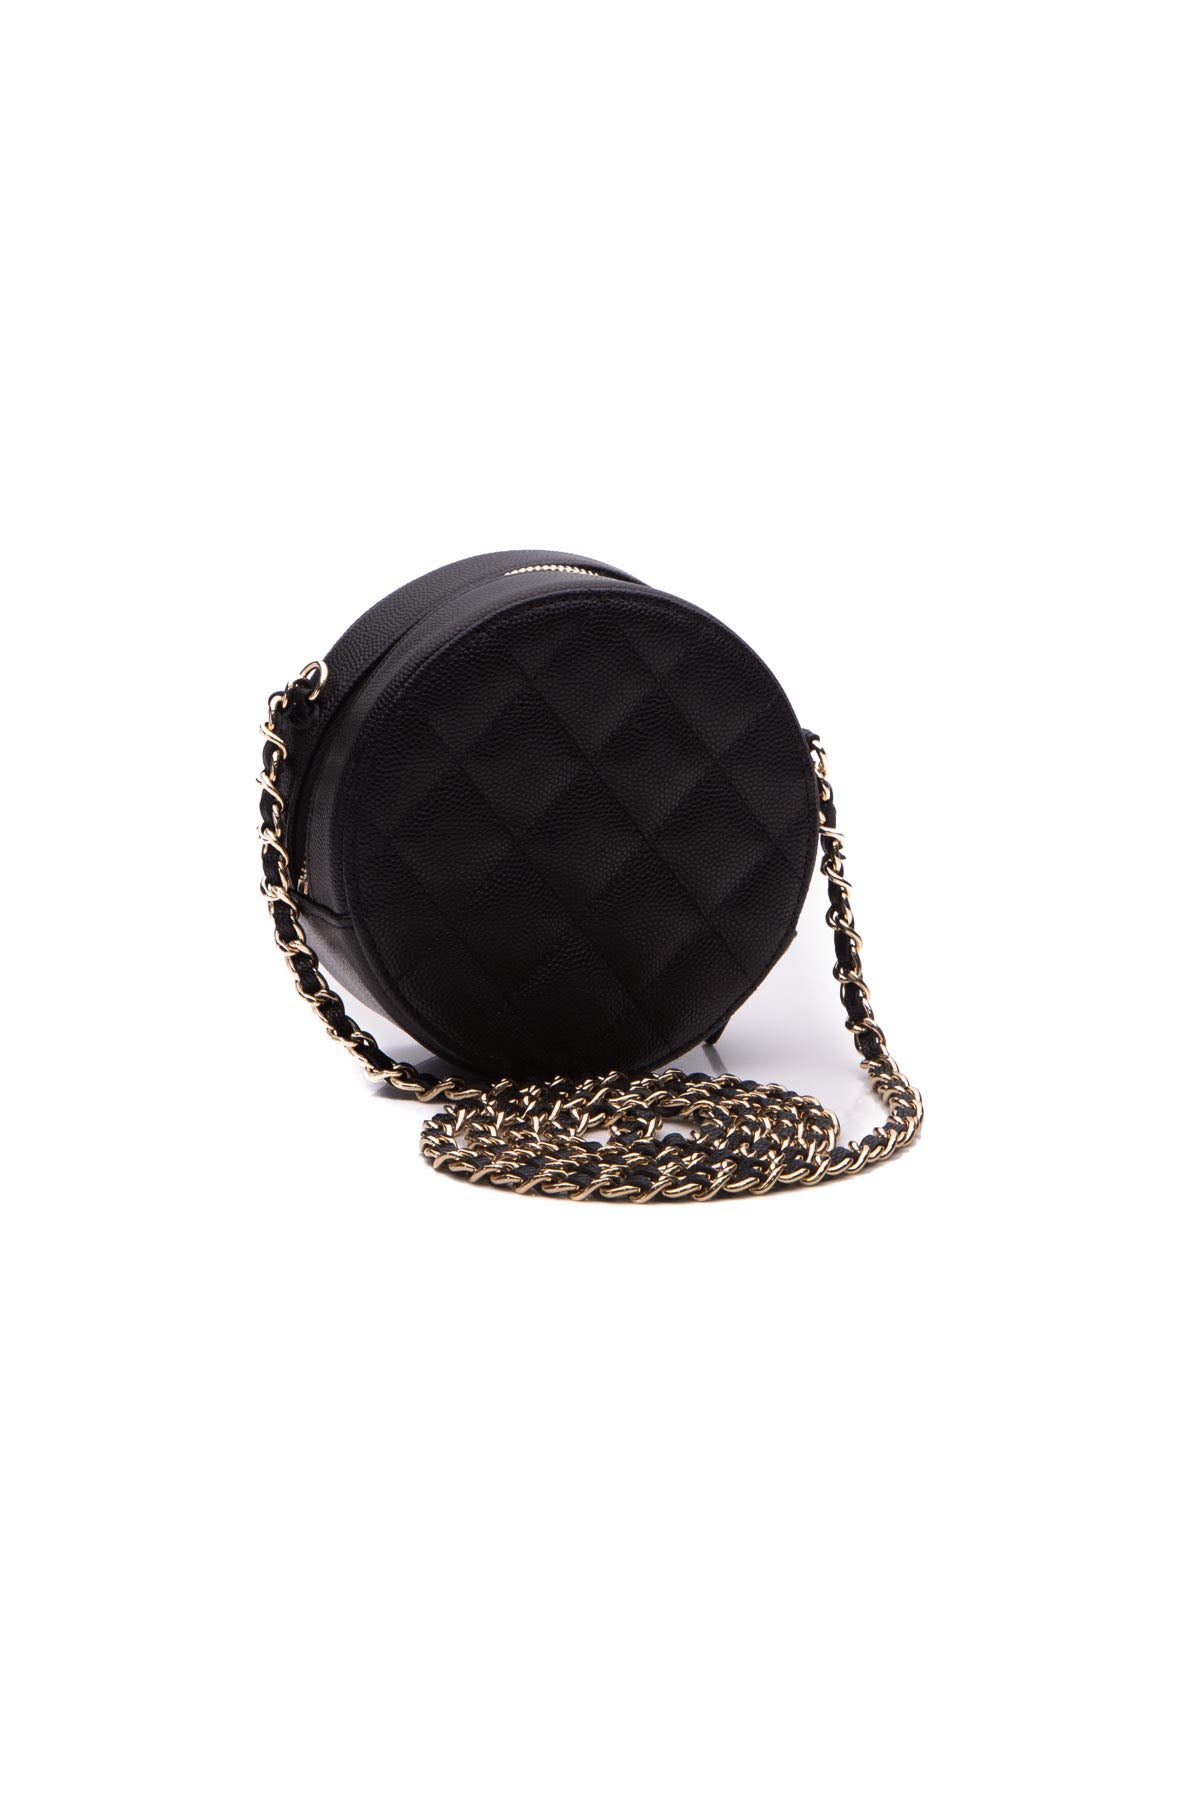 Chanel Black Quilted Caviar Leather Round CC Filigree Crossbody